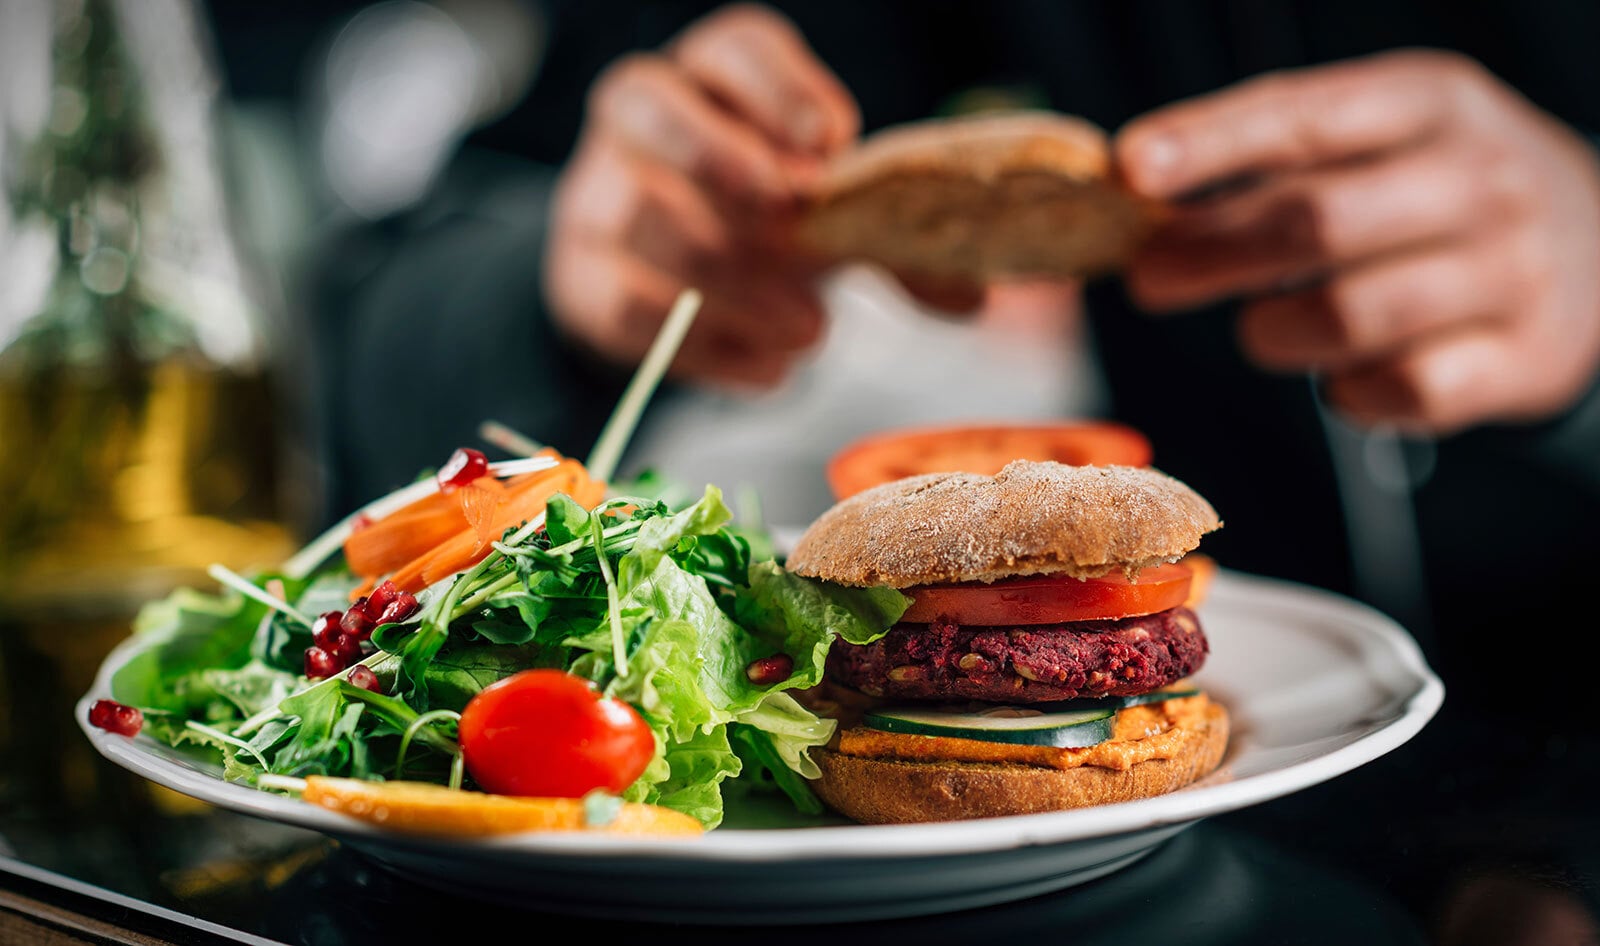 Global Plant-Based Burger Market Predicted to Quadruple by 2033 to $23.2 Billion